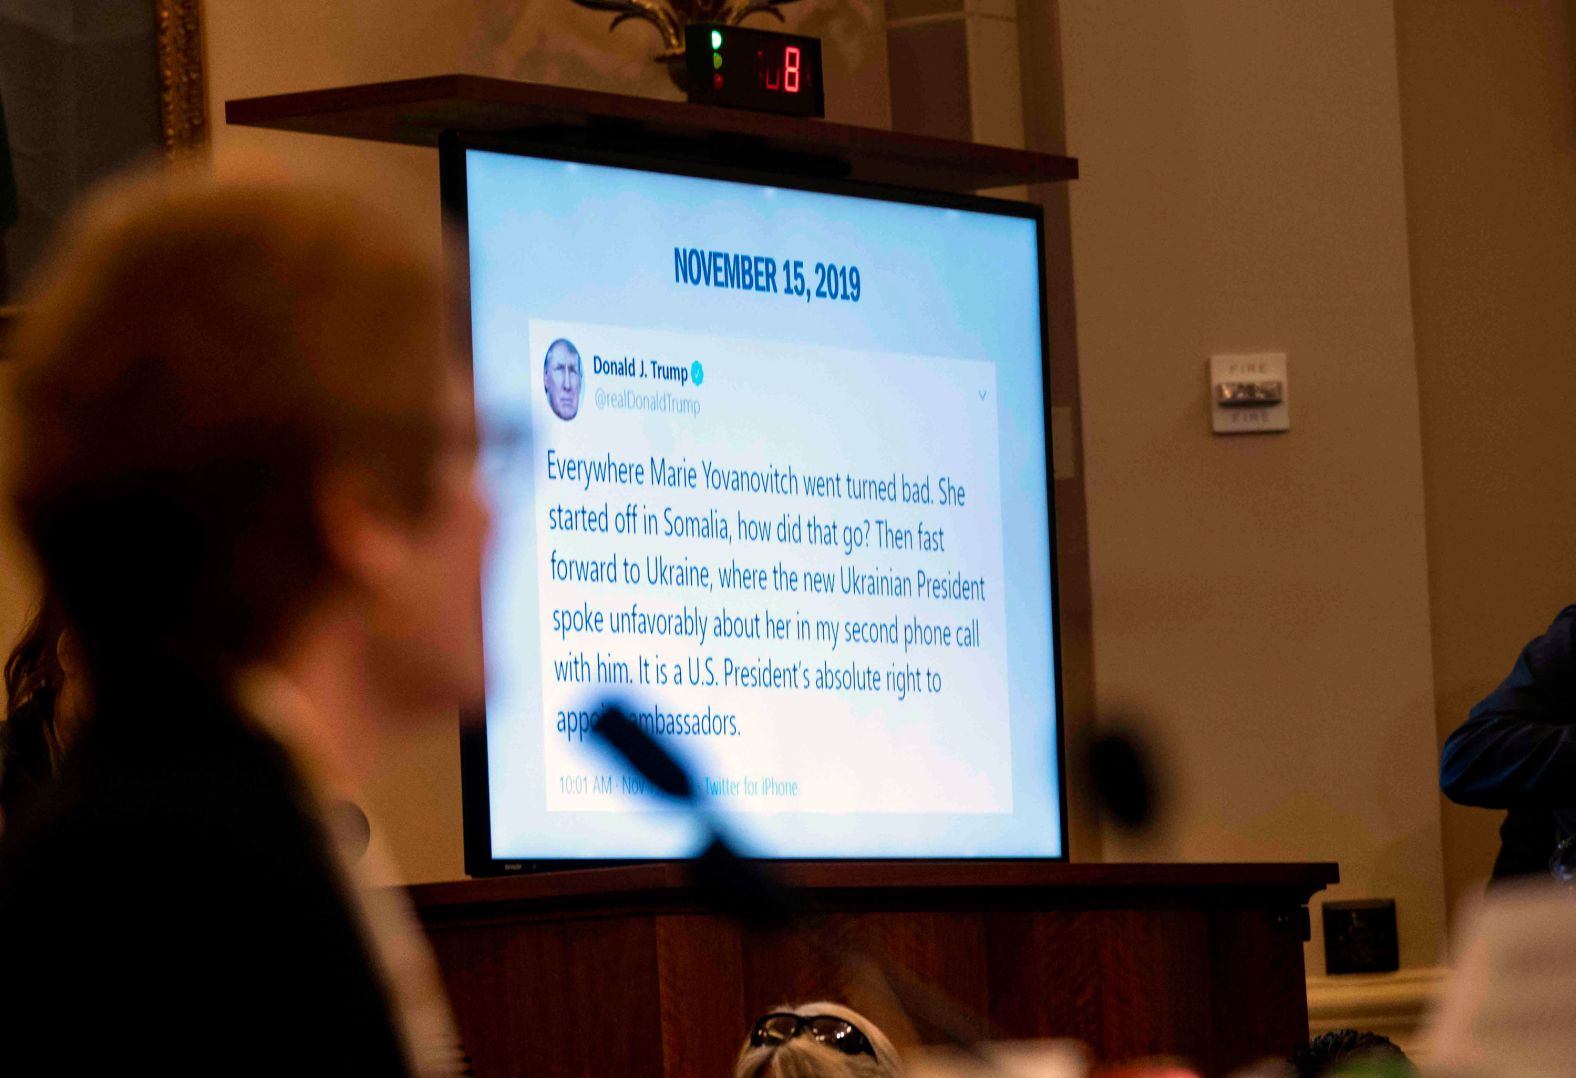 A tweet from President Trump is displayed on a video monitor as Marie Yovanovitch, the former United States ambassador to Ukraine, appears before the House Intelligence Committee on November 15. <a href="index.php?page=&url=https%3A%2F%2Fwww.cnn.com%2F2019%2F11%2F15%2Fpolitics%2Fpublic-impeachment-hearings-day-2%2Findex.html" target="_blank">Yovanovitch</a> spent 33 years in the State Department, serving both Republican and Democratic presidents. Trump removed her in May.